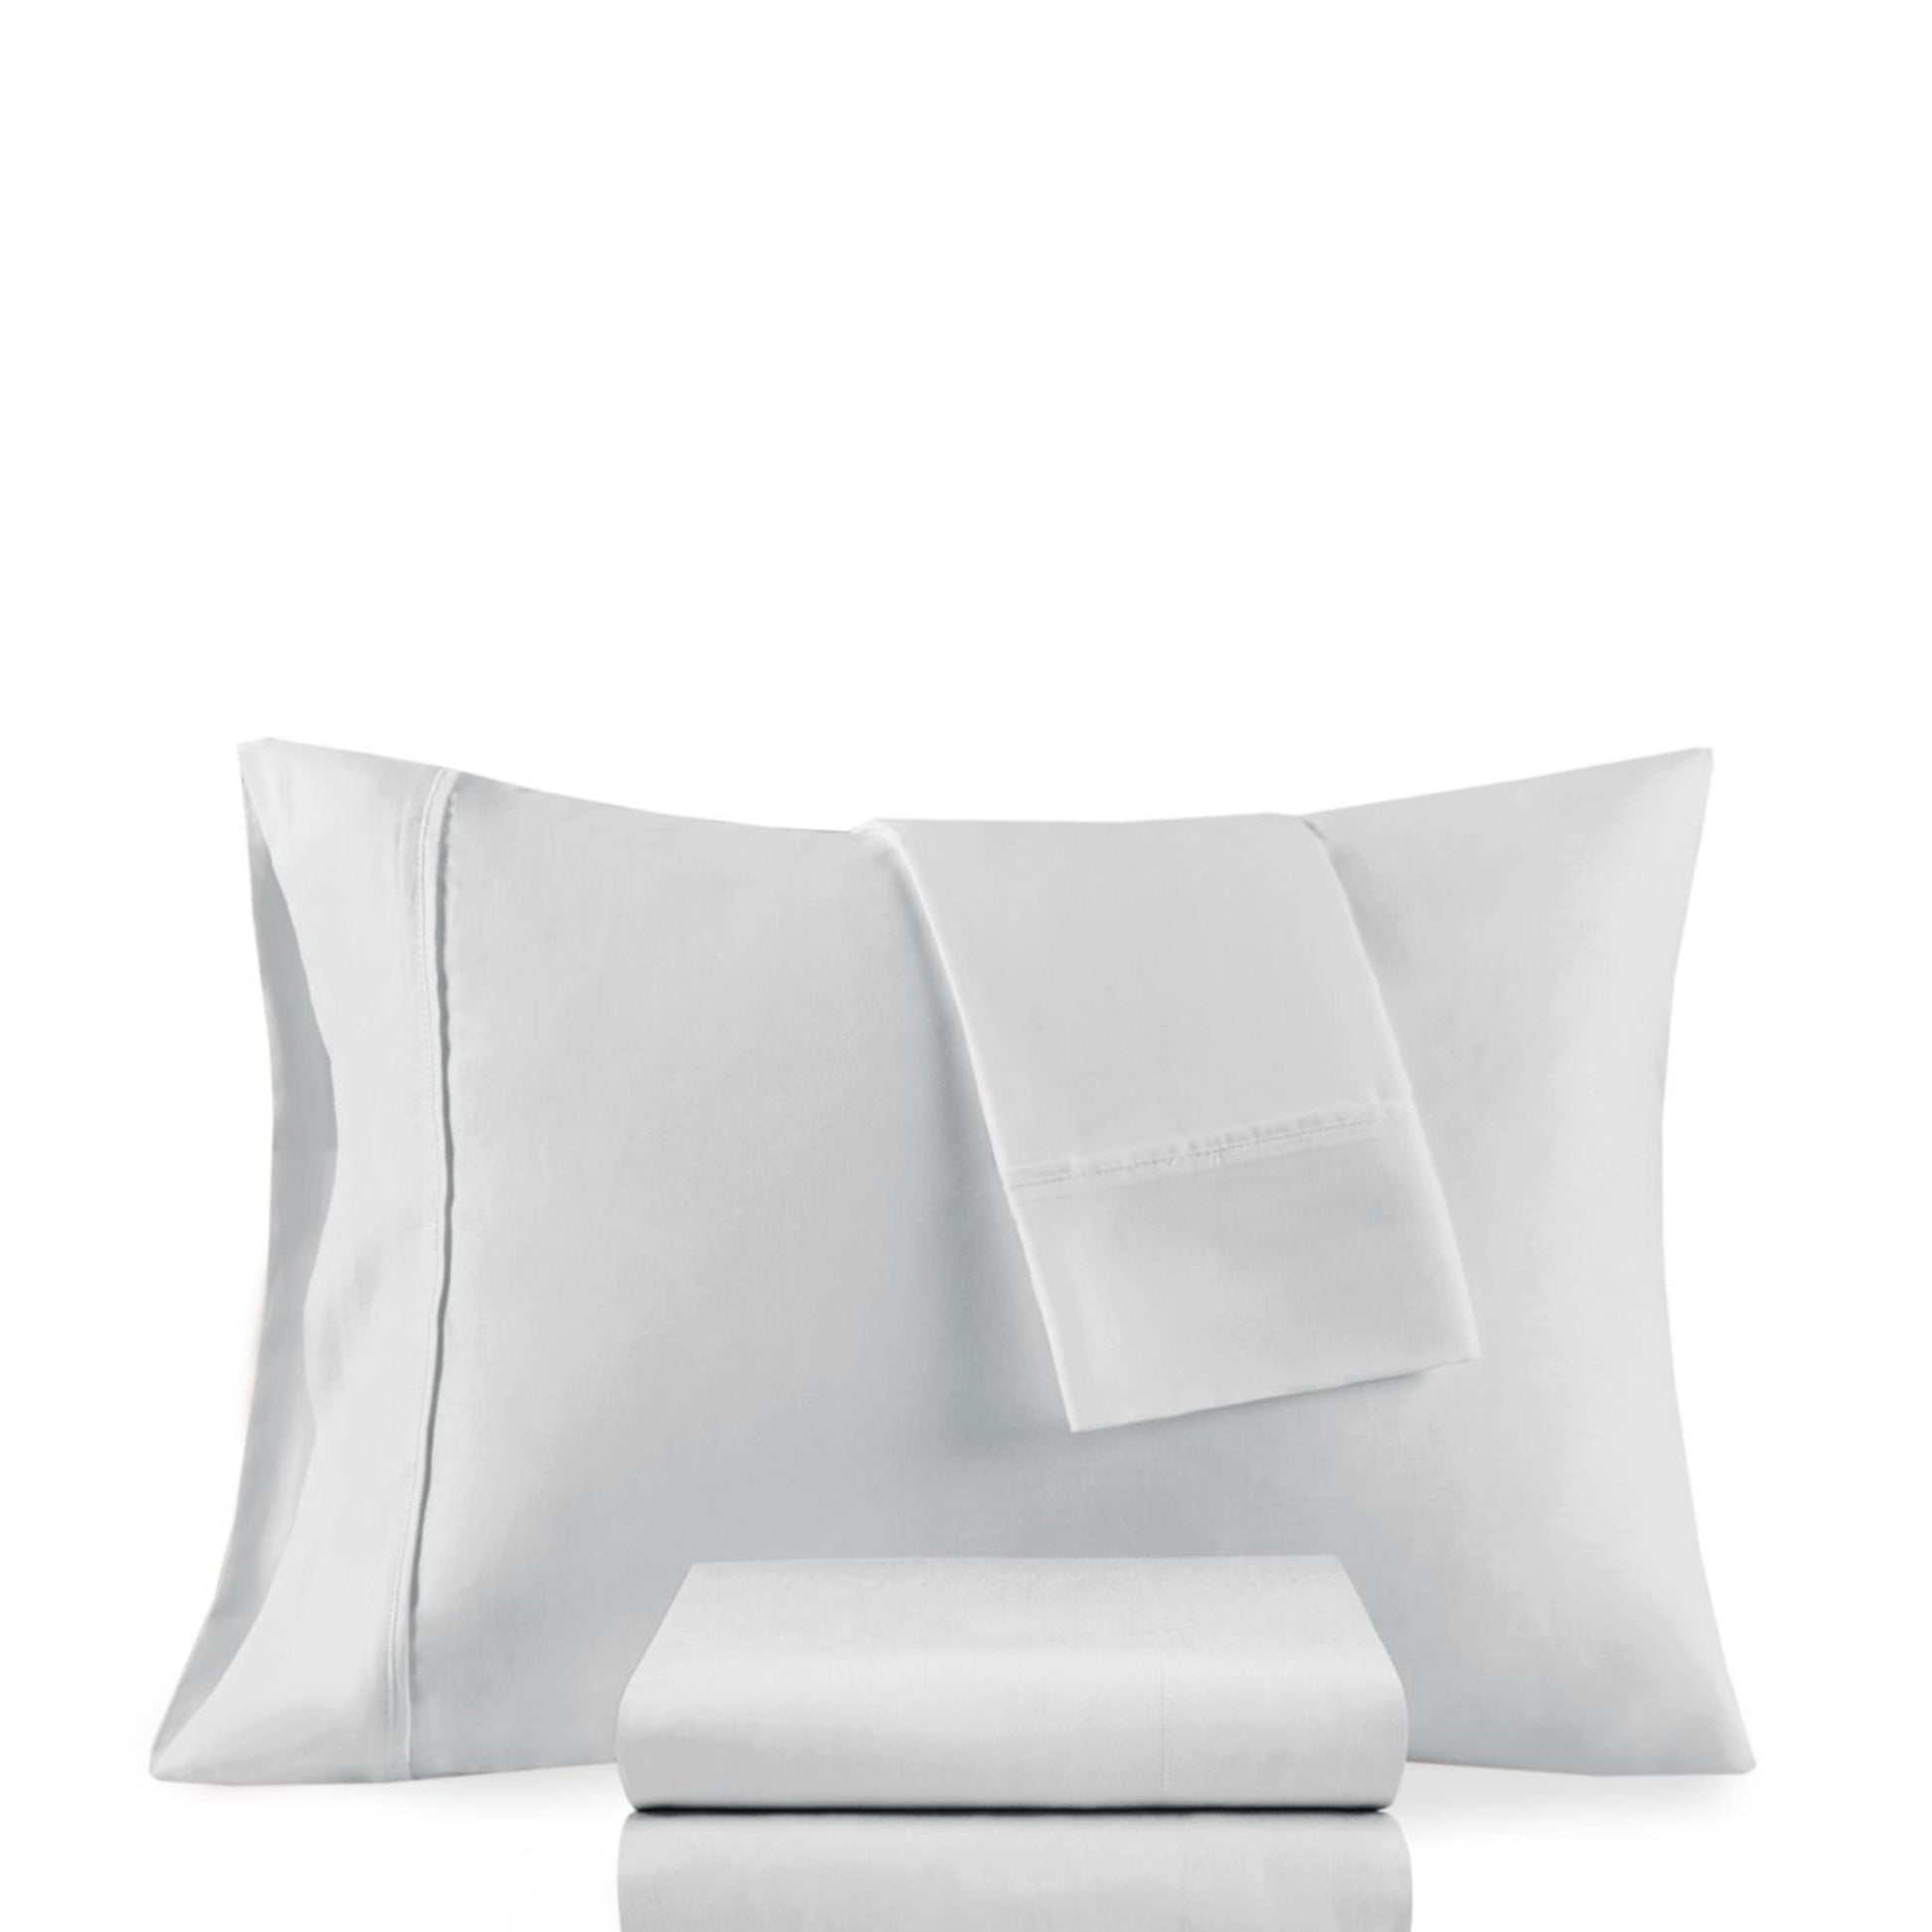 CLEAN SPACES Sheet Sets King / Grey CLEAN SPACES  - Antimicrobial King Sheet Sets